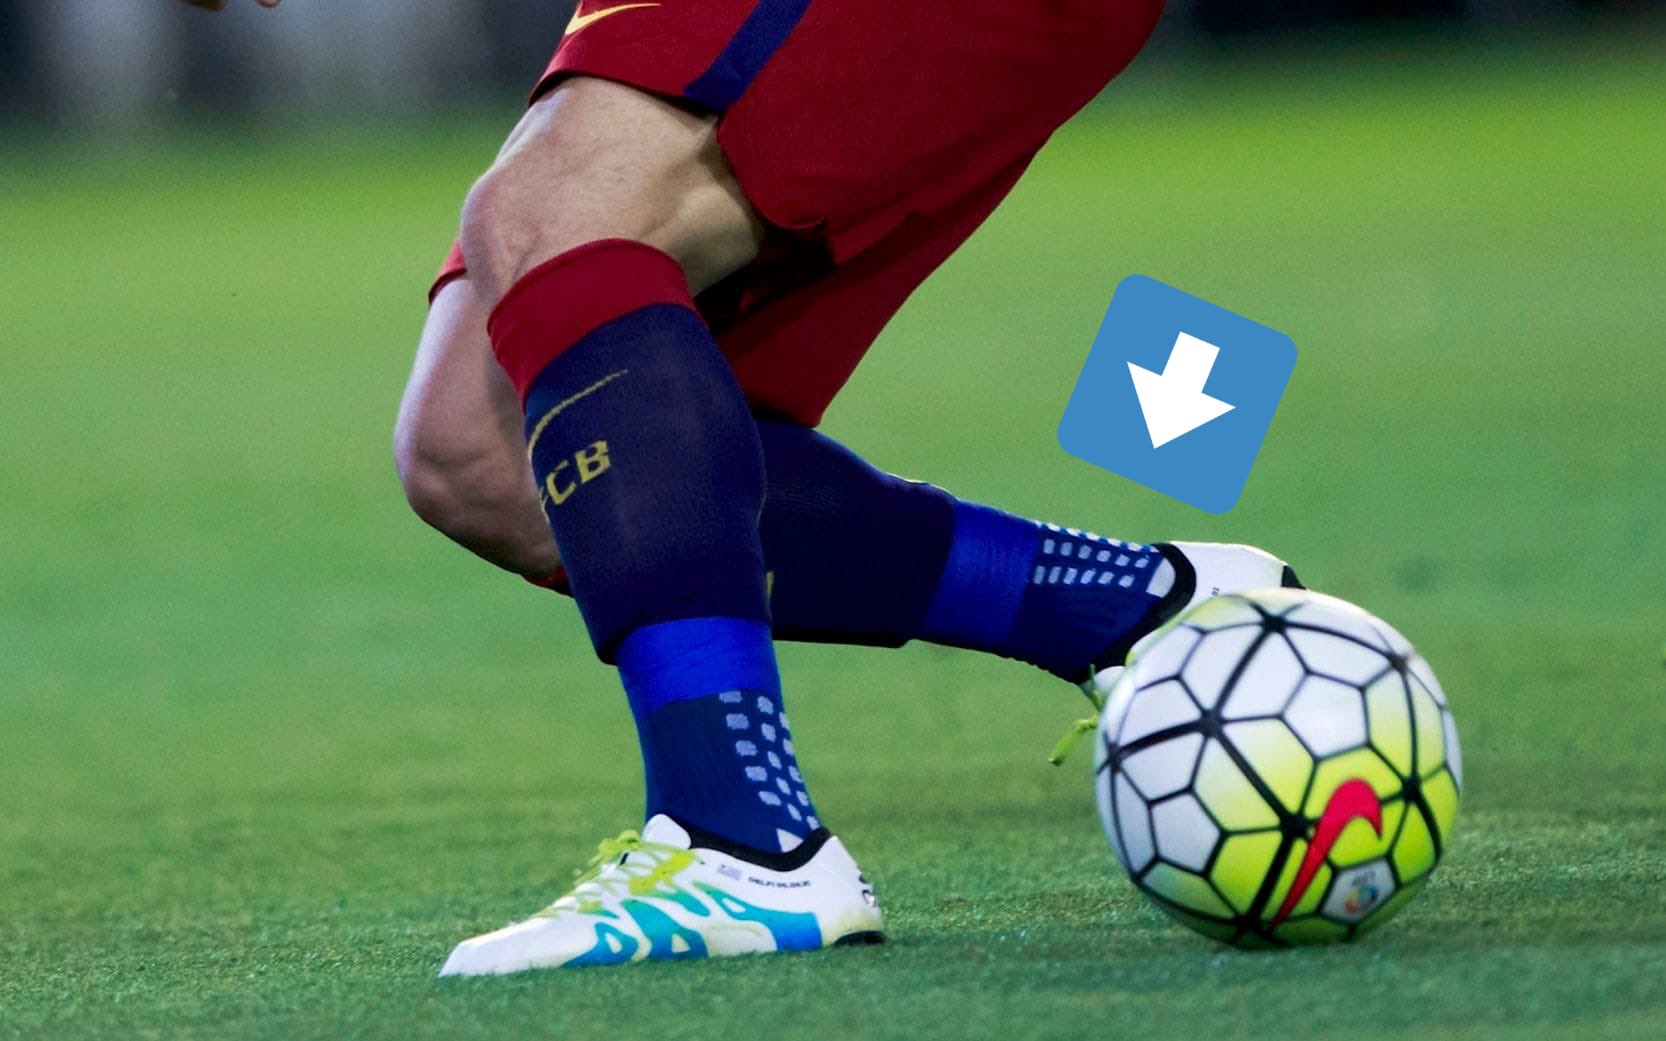 Caught Offside on X: .@arlowhite the socks are cut because in the boot the  players like to wear @TRUsox socks (or another brand) that have extra grip/non  slip qualities to the standard